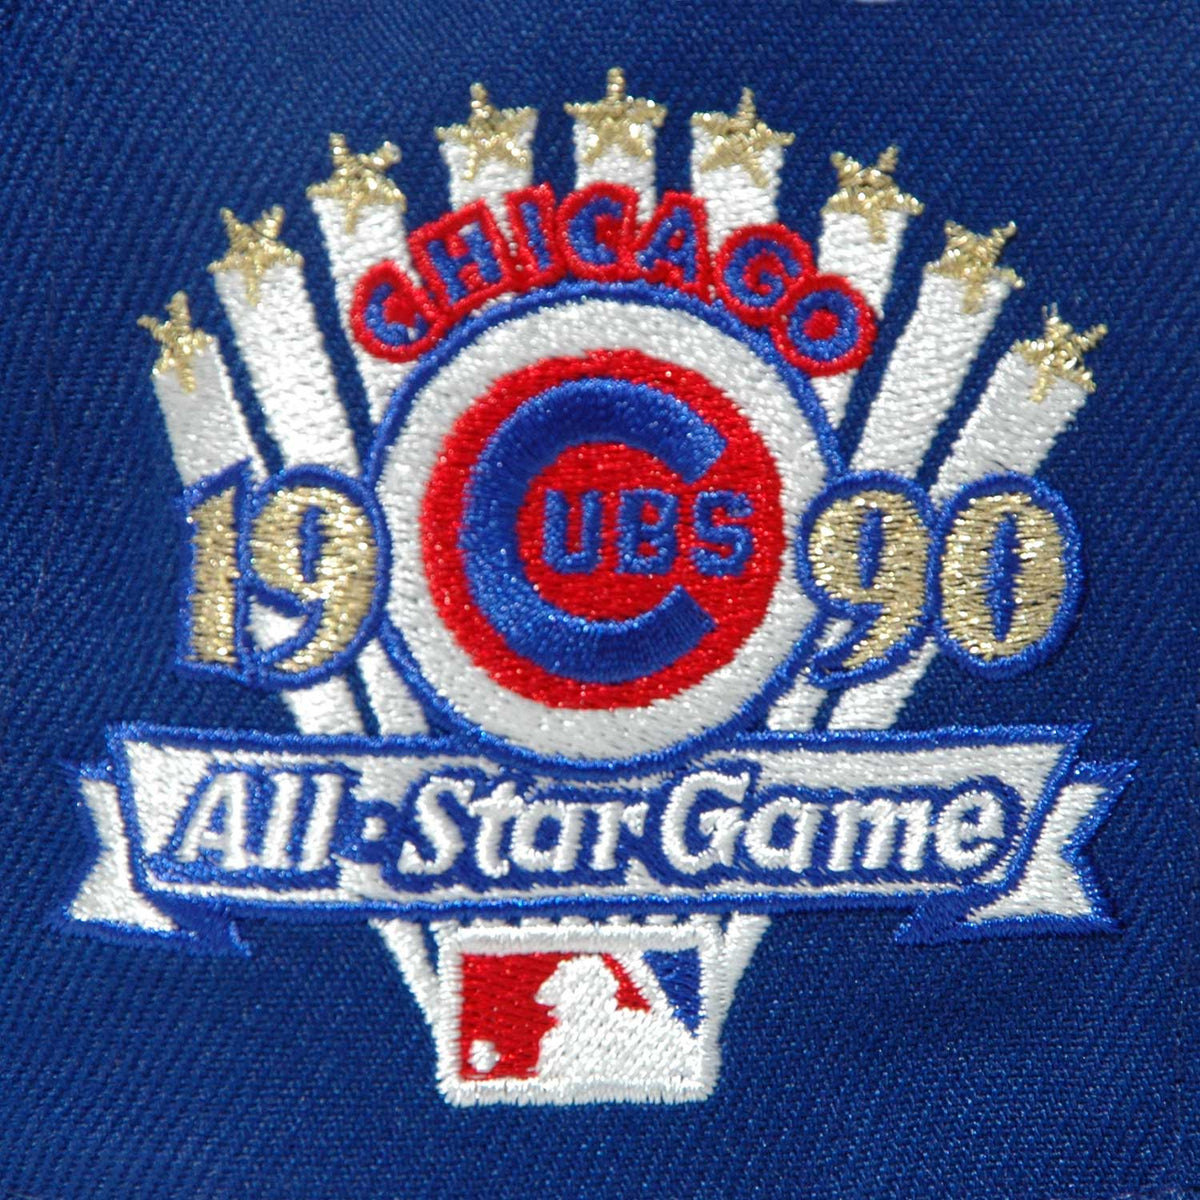 Chicago Cubs 1984 Bear w/ 1990 All Star Game Patch 59FIFTY Fitted